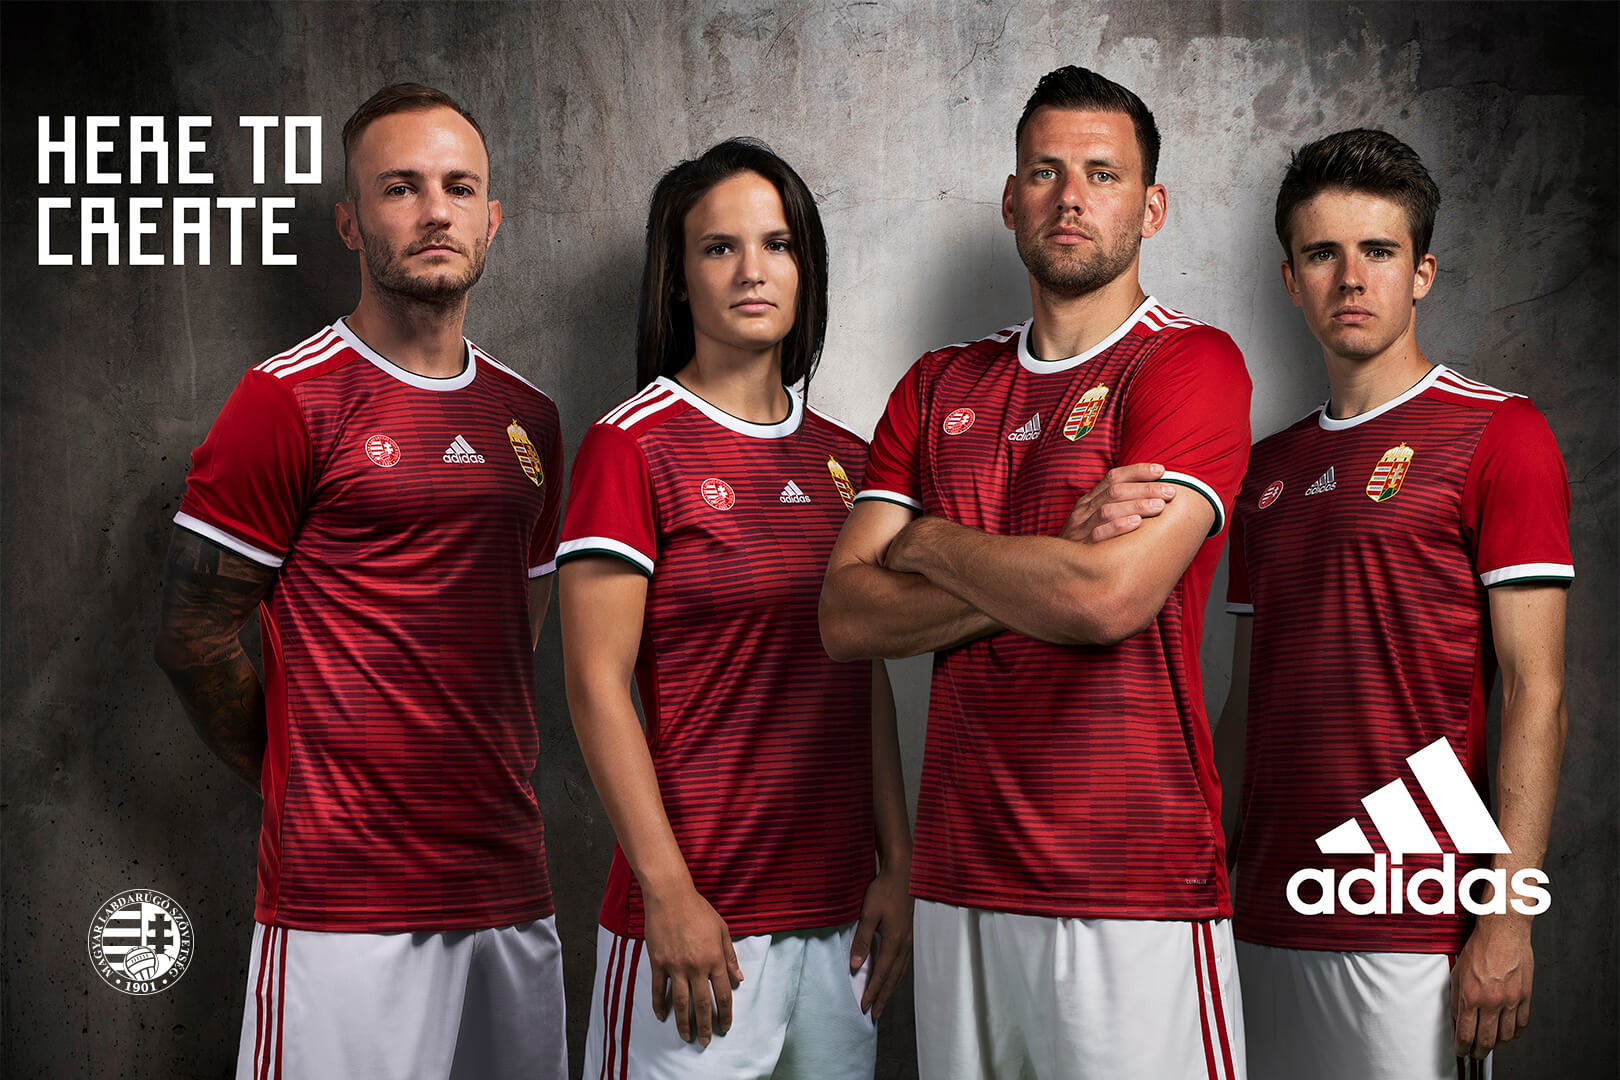 New Hungary national team kit launched 